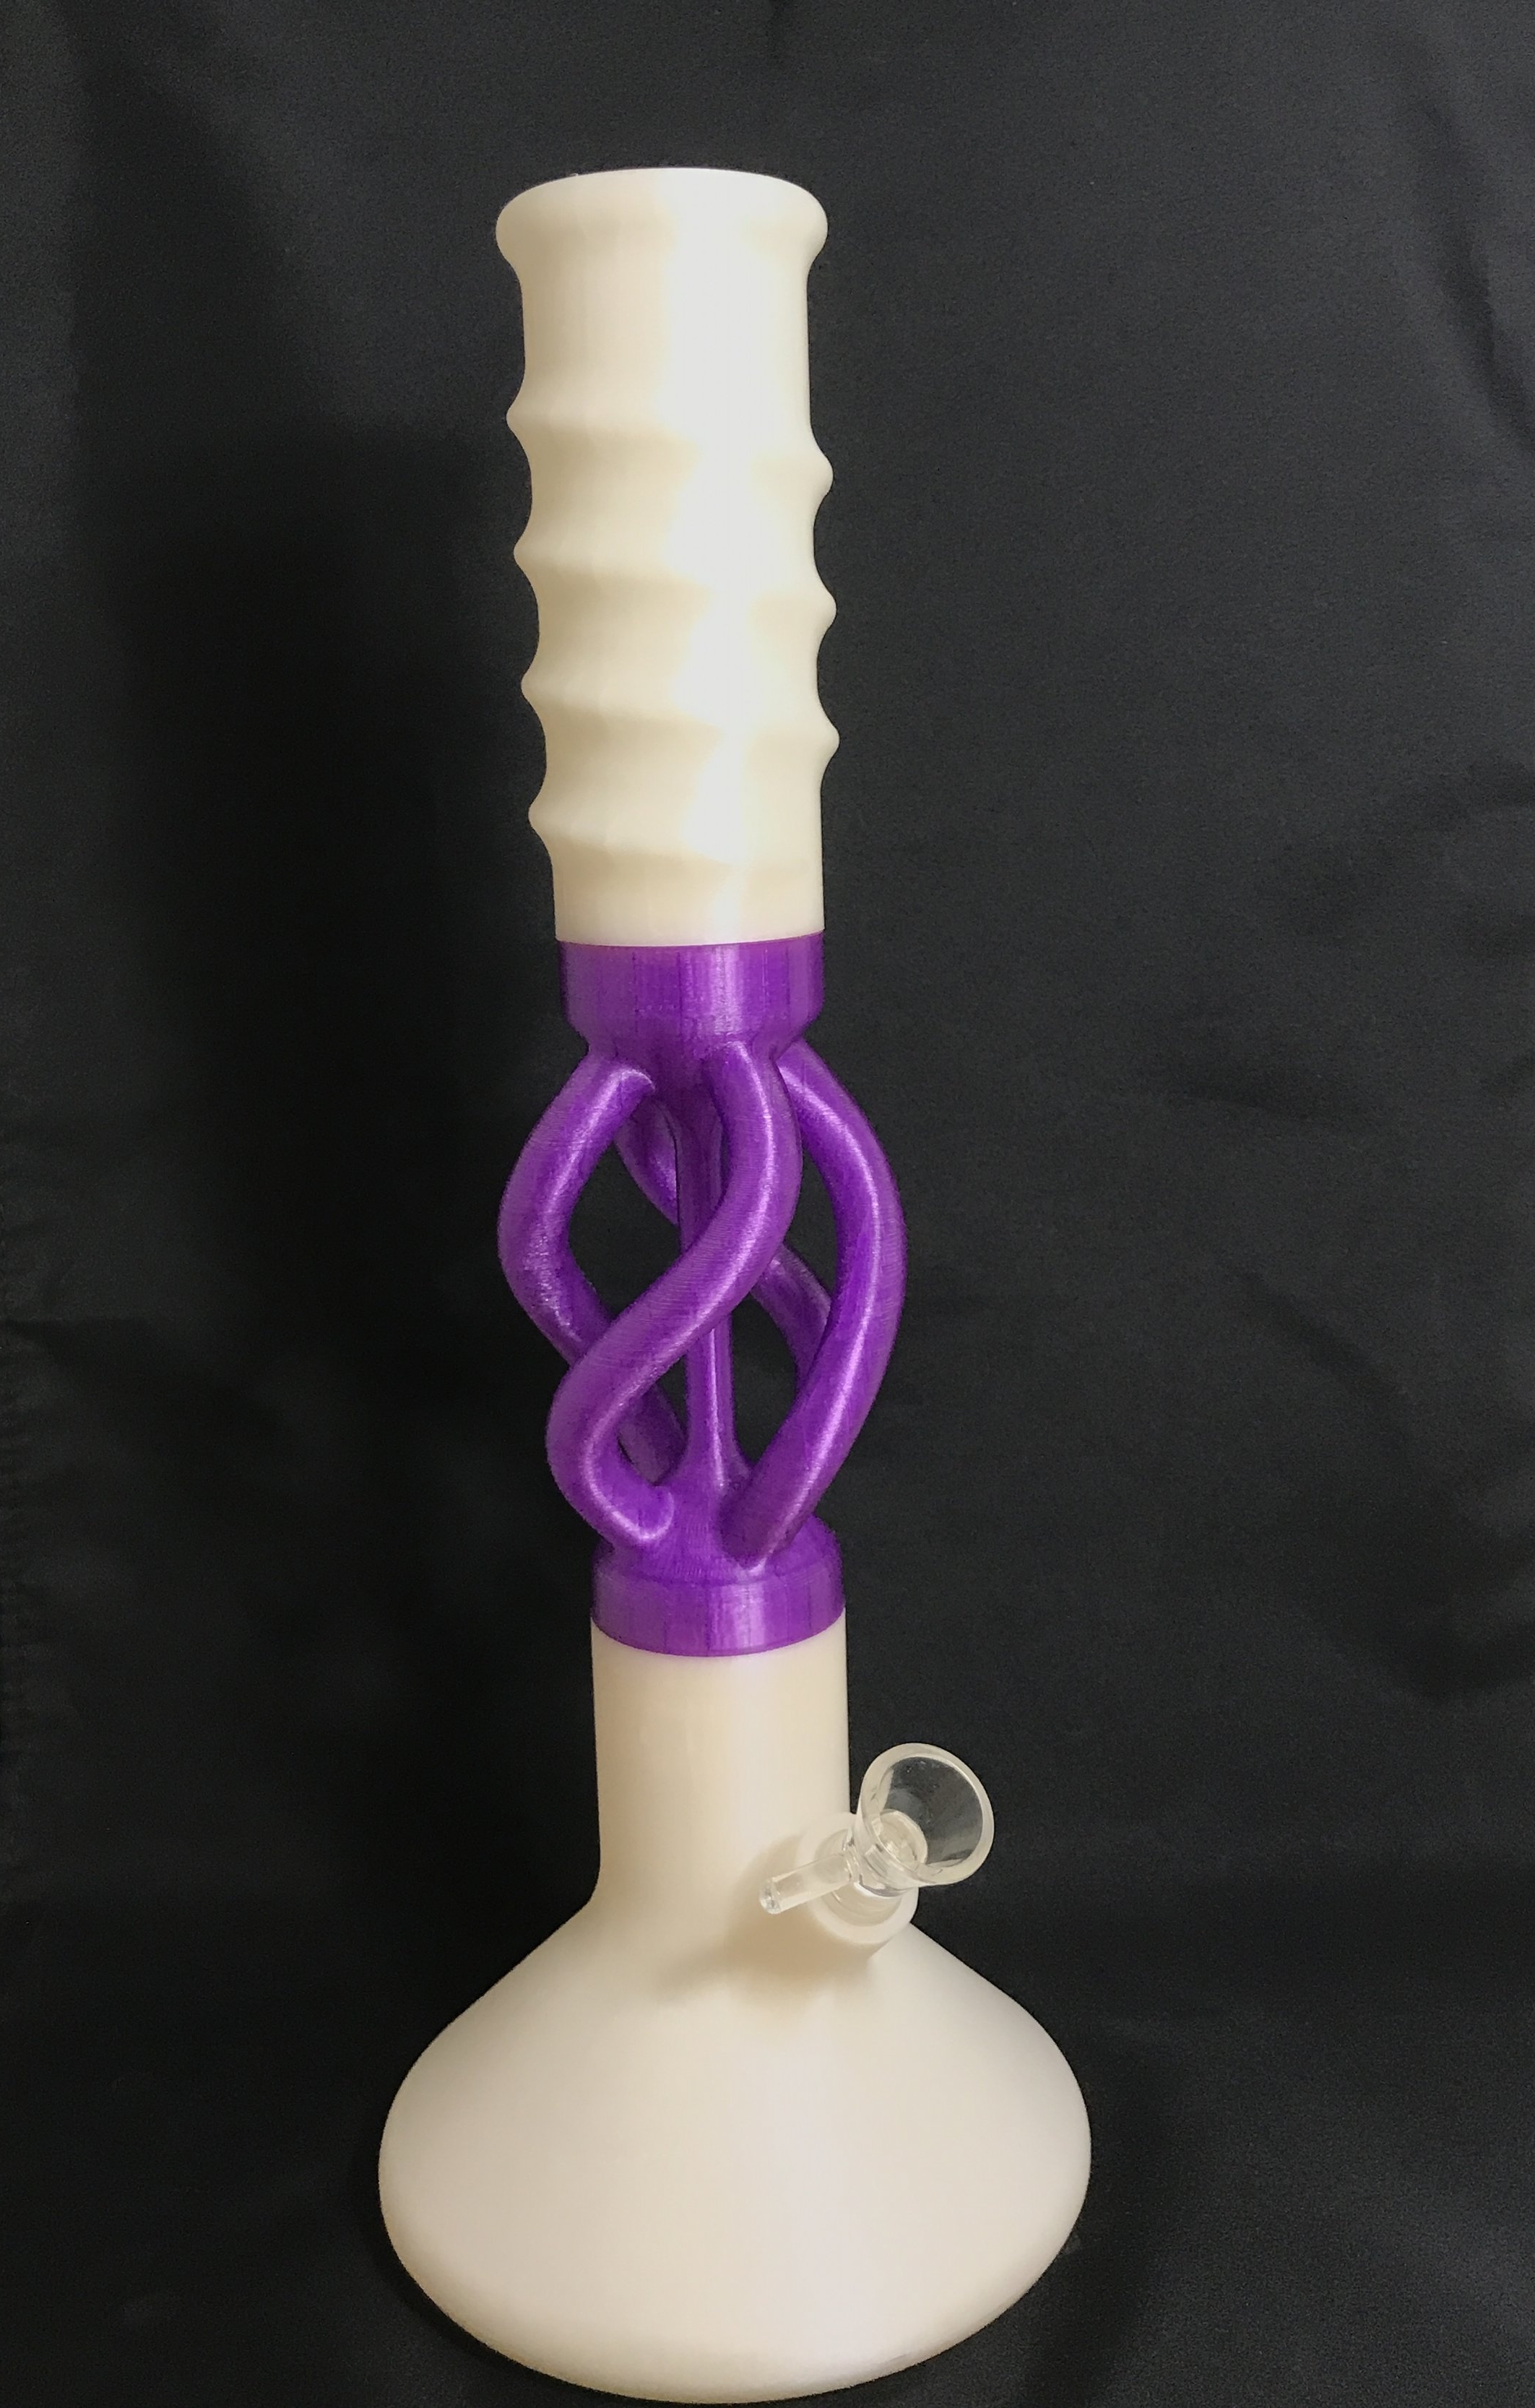 Review of My 3-D Printed Bong from Lifted Innovations